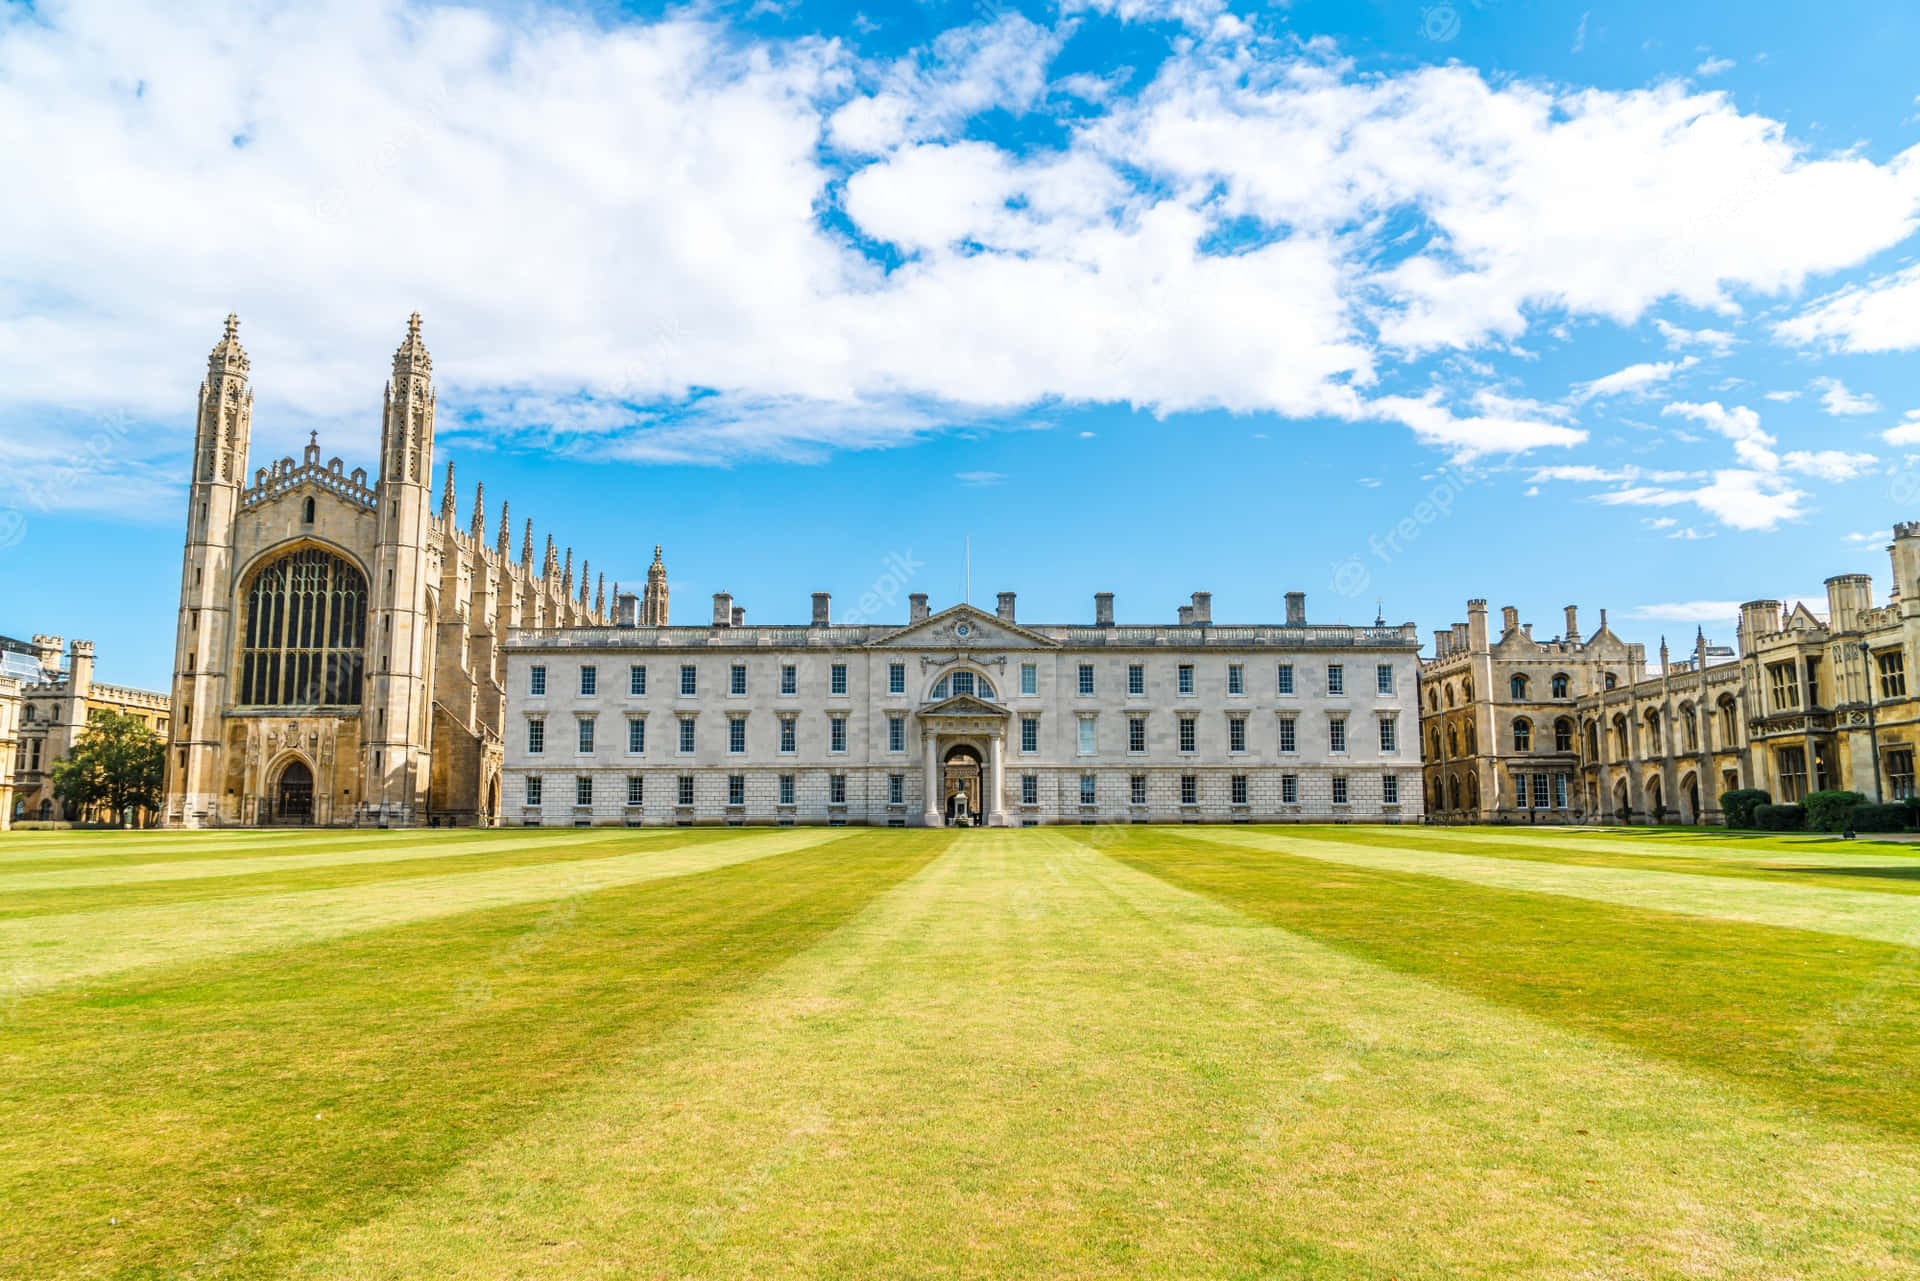 Picturesque King's College Chapel at the University of Cambridge Wallpaper